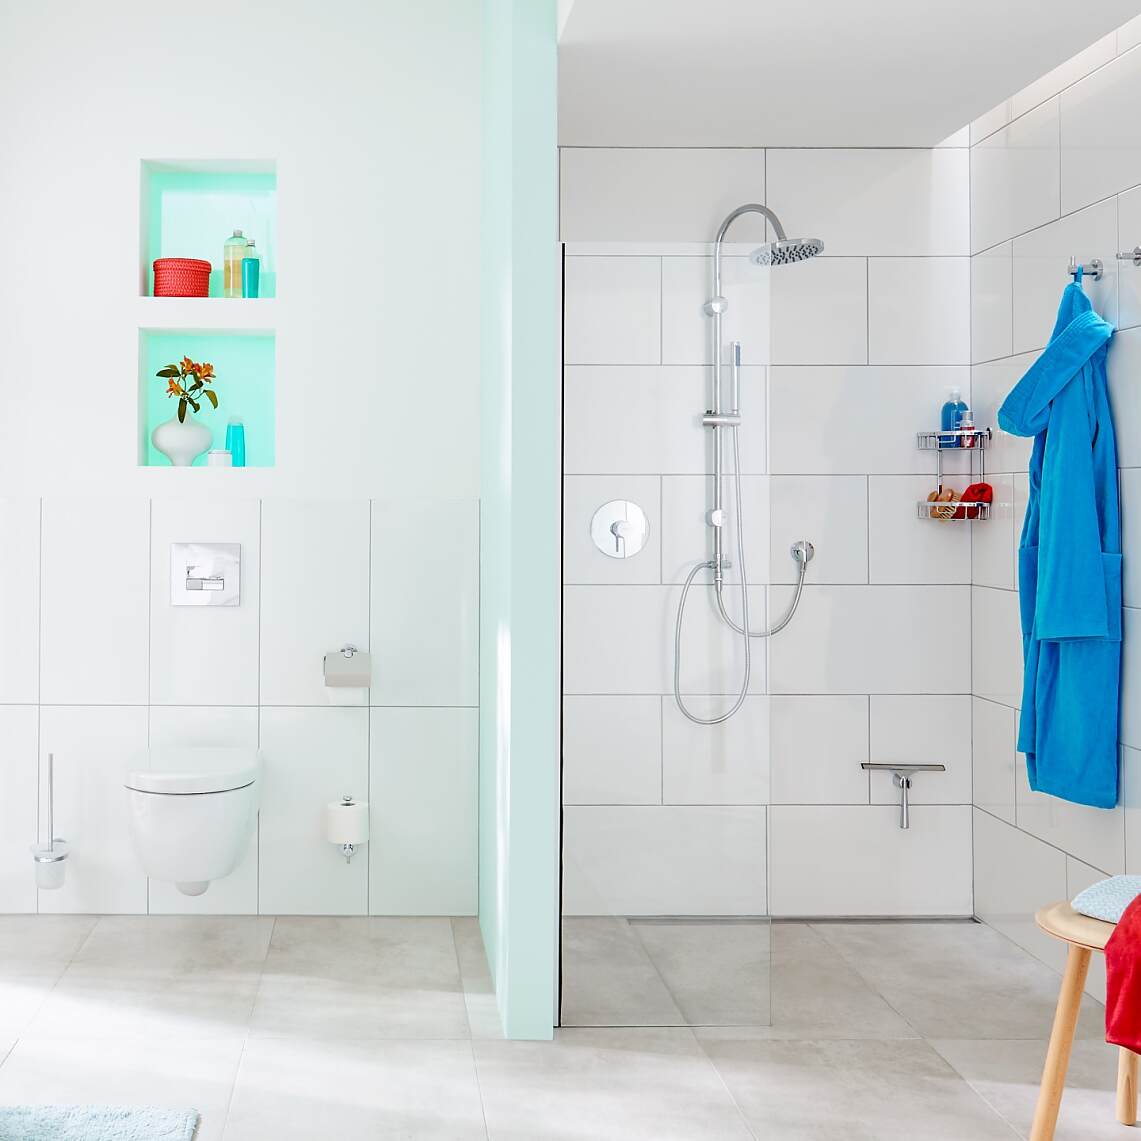 Adhesive Solutions for Bathroom Accessories - tesa